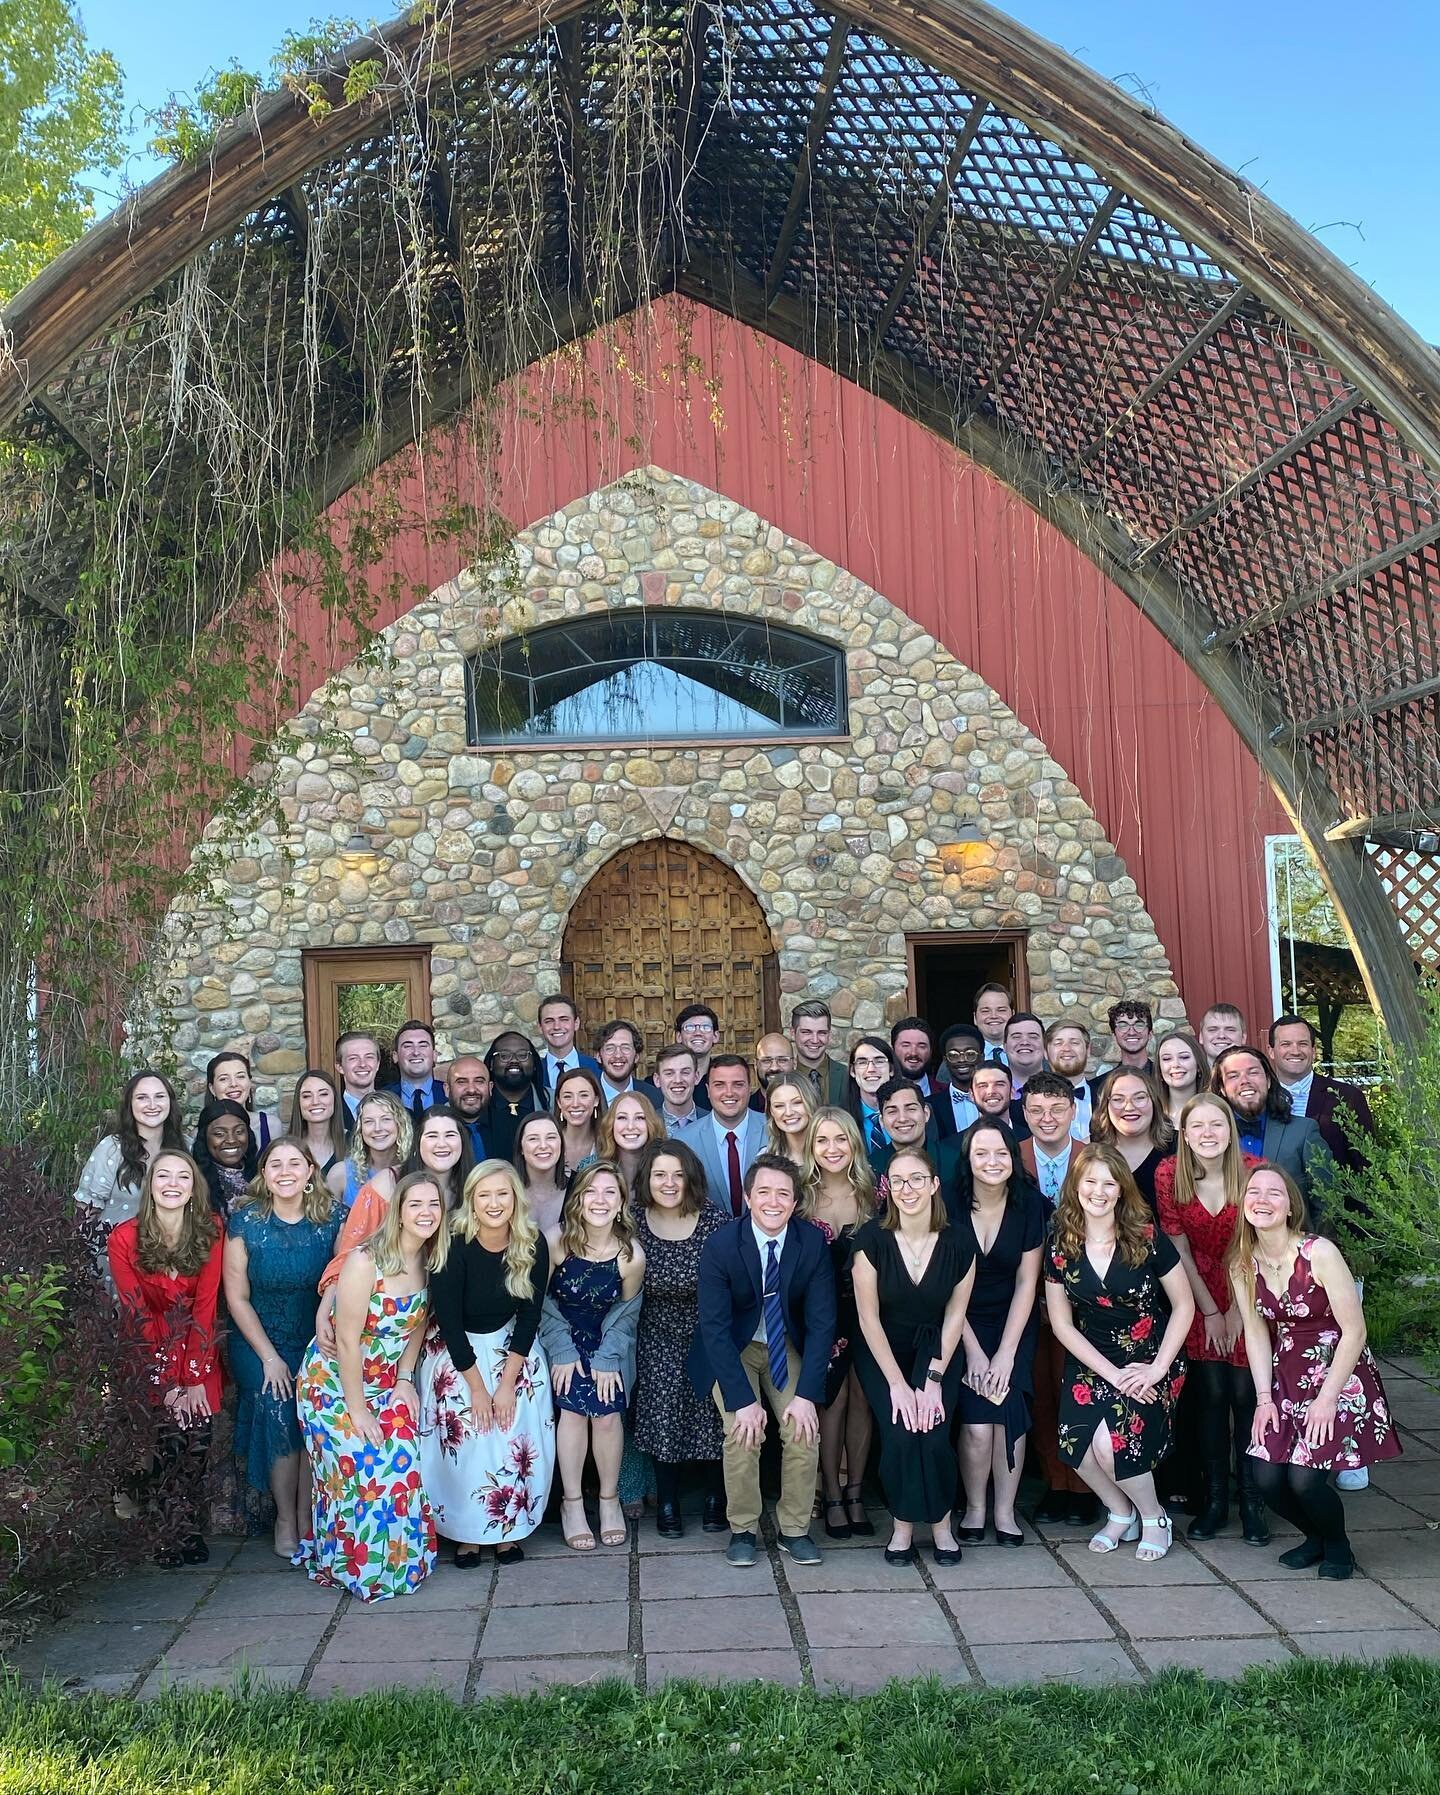 Another year, another incredible Chorale tour in the books! So blessed to be able to travel and perform with all of these wonderful people.